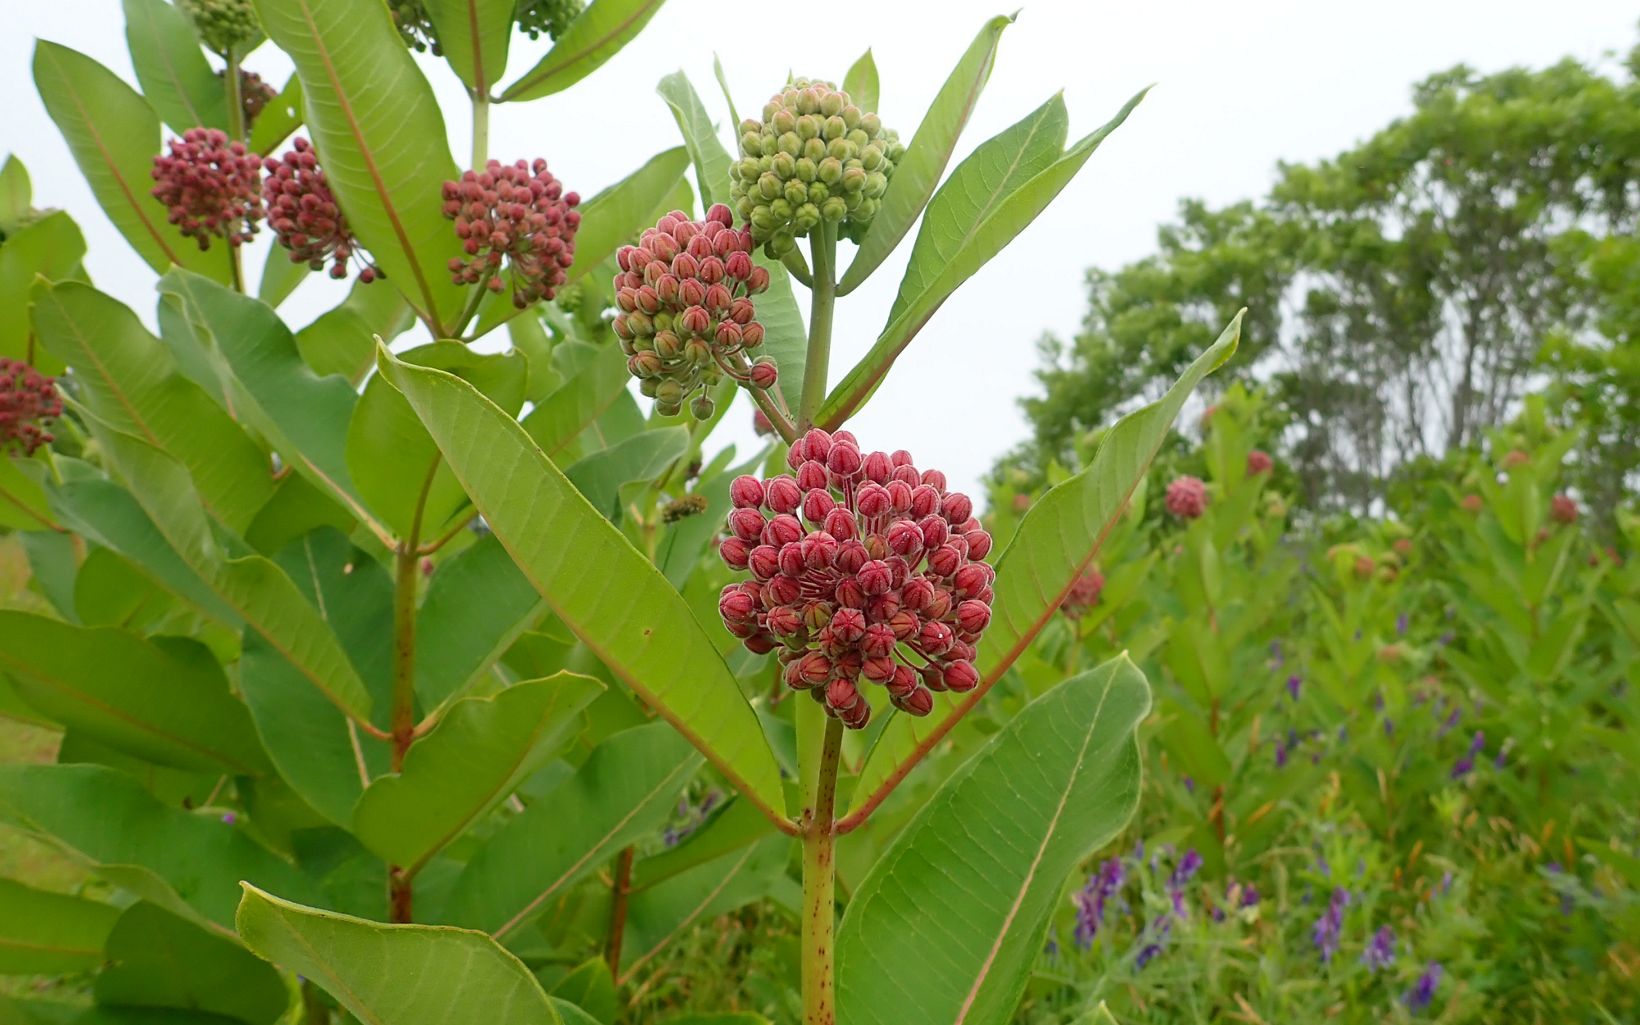 Common Milkweed Common milkweed and other plants that are vital food sources for pollinators like monarch butterflies were strategically planted throughout the Garrett Family Preserve. © Lily Mullock/TNC